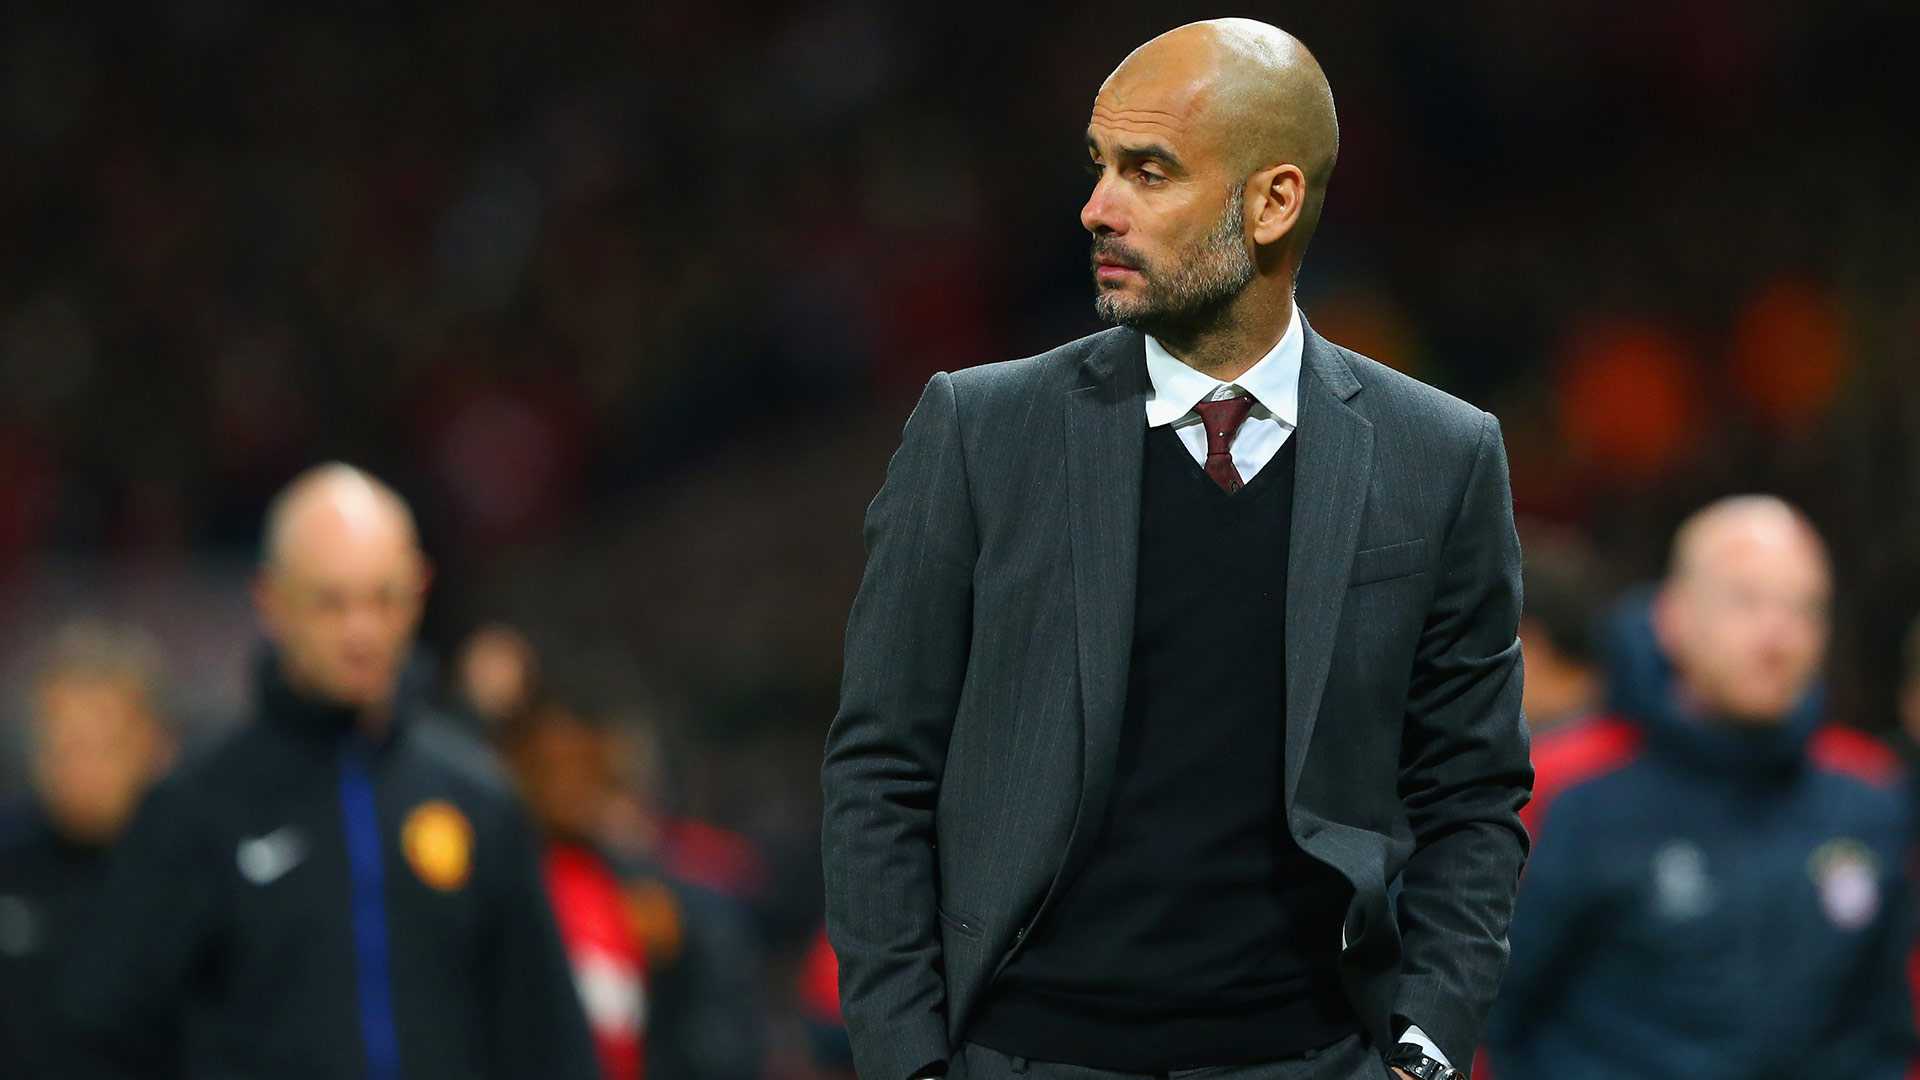 Pep Guardiola best dressed football manager